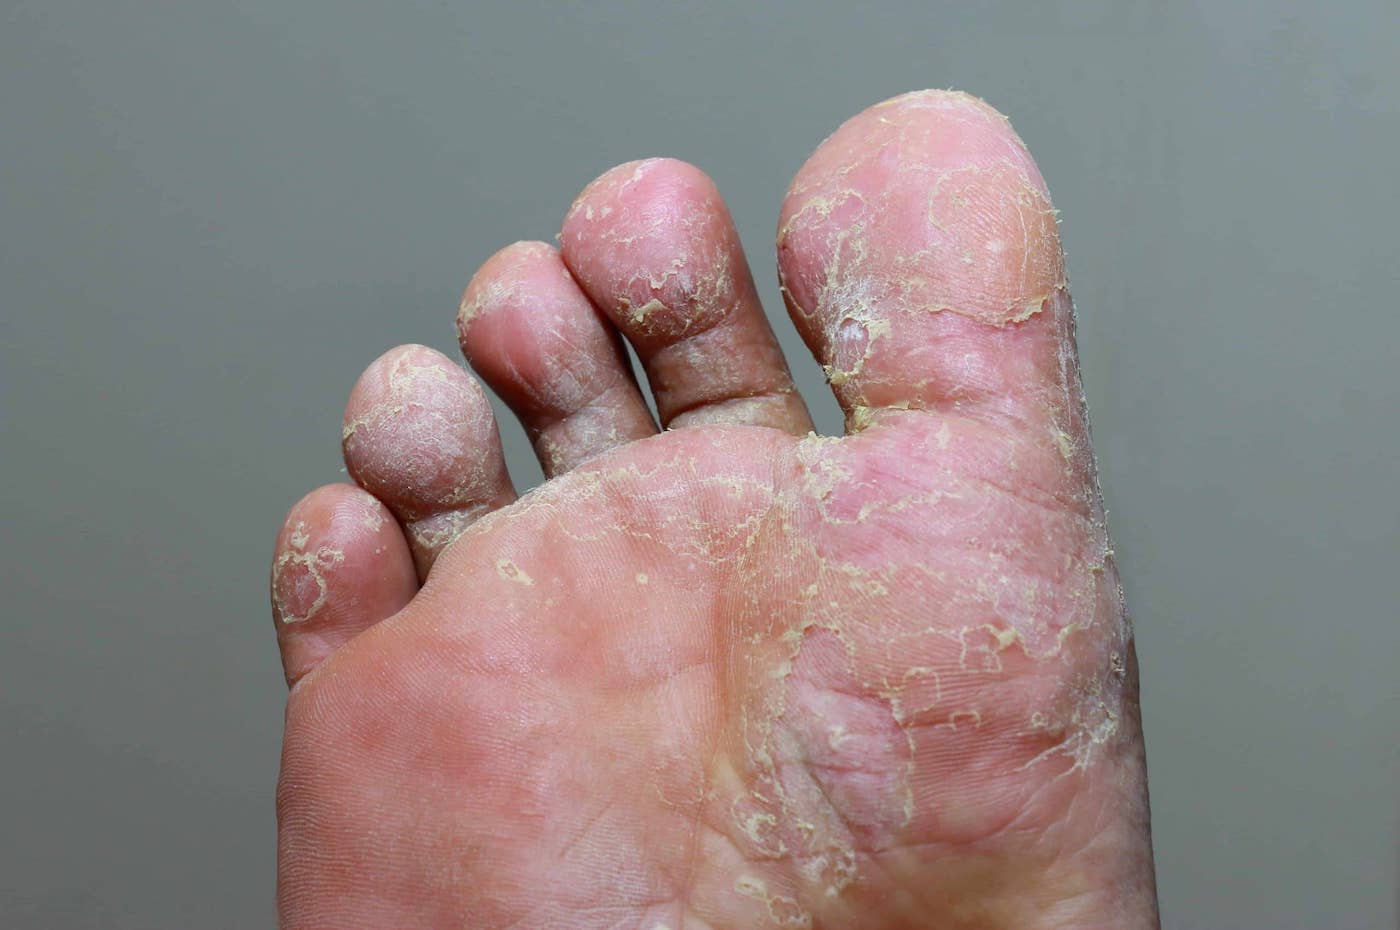 Fungal nail infection: diagnosis and management | The BMJ